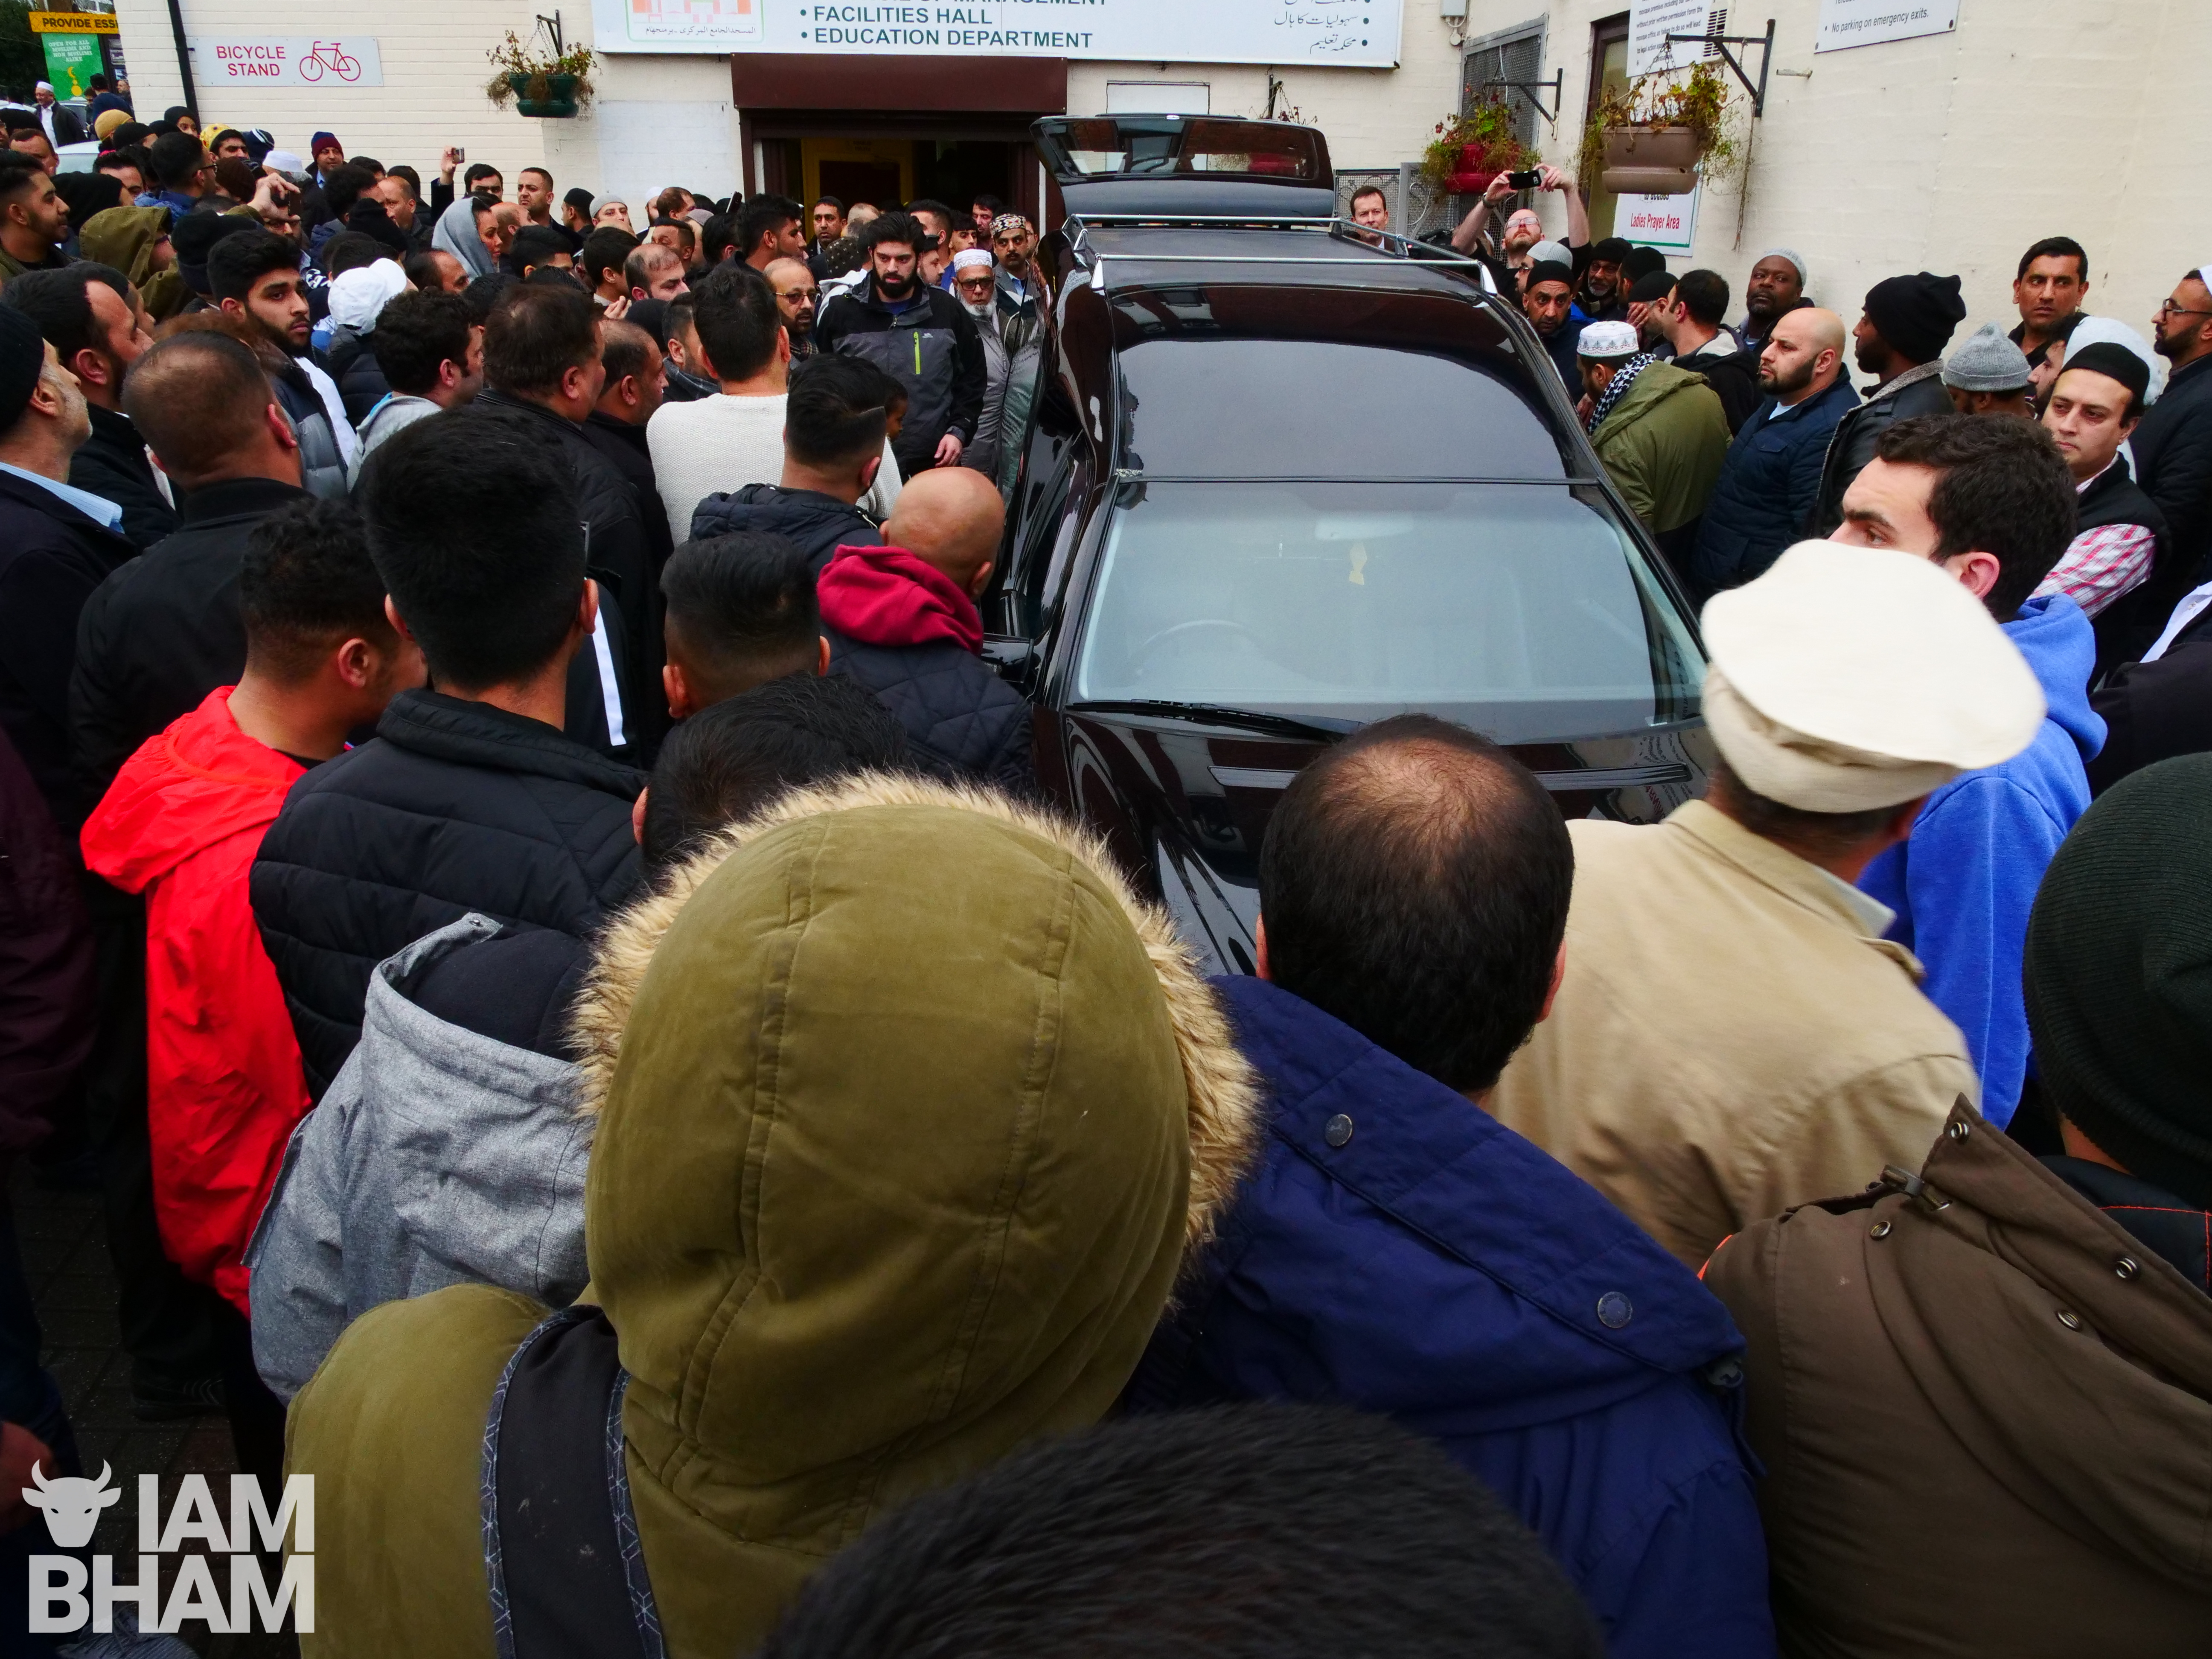 Worshippers and attendees occupied every available space on the grounds of the Birmingham Central Mosque following a huge turnout to Imtiaz Mohammed's funeral